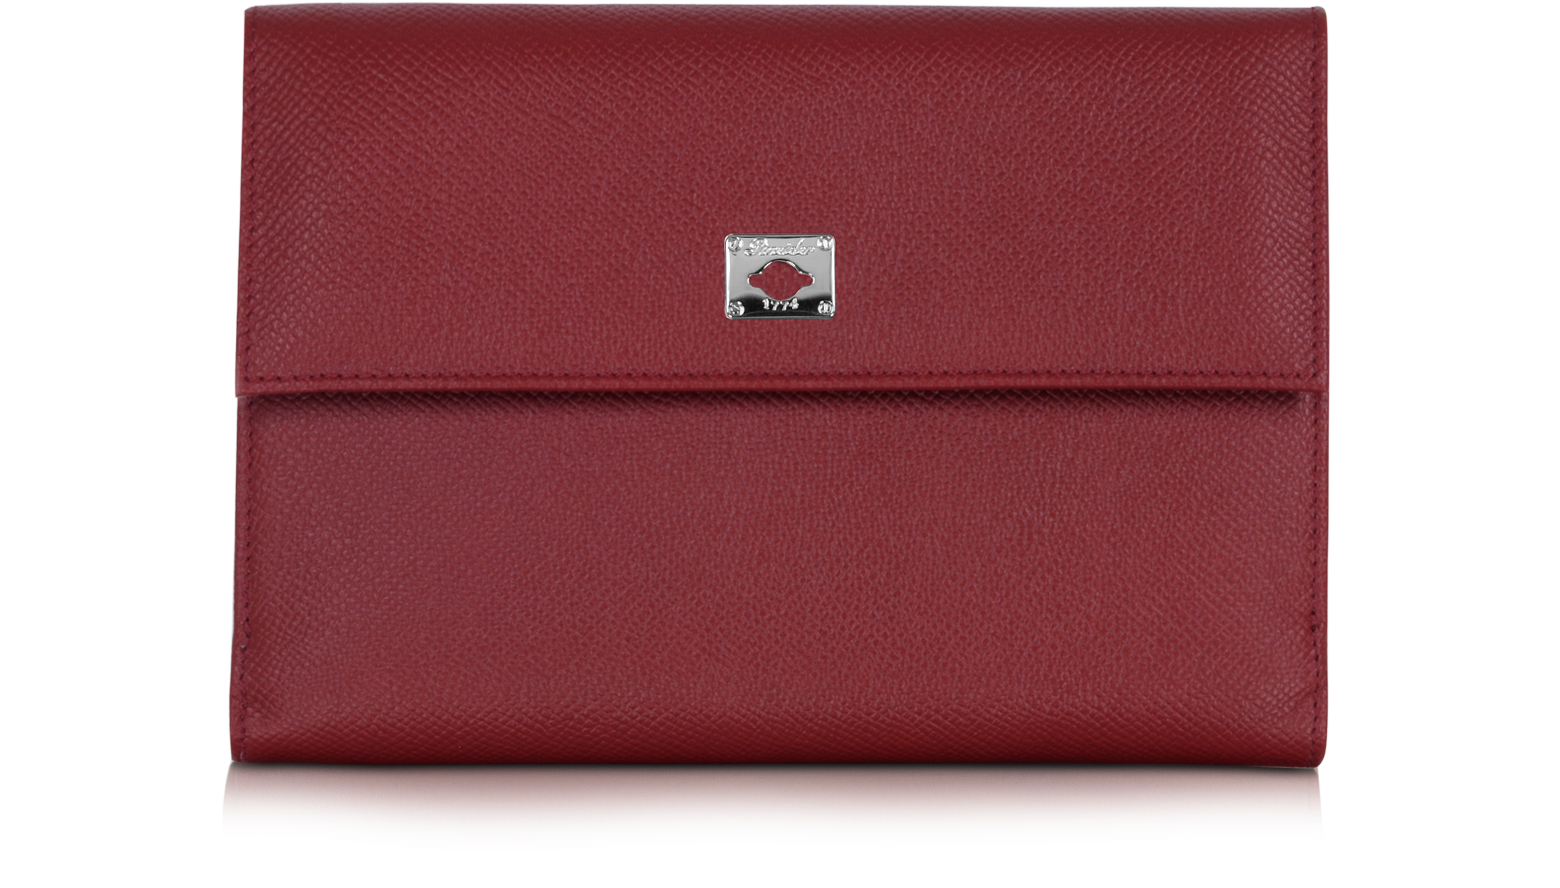 Pineider City Chic Burgundy Leather French Purse Wallet at FORZIERI